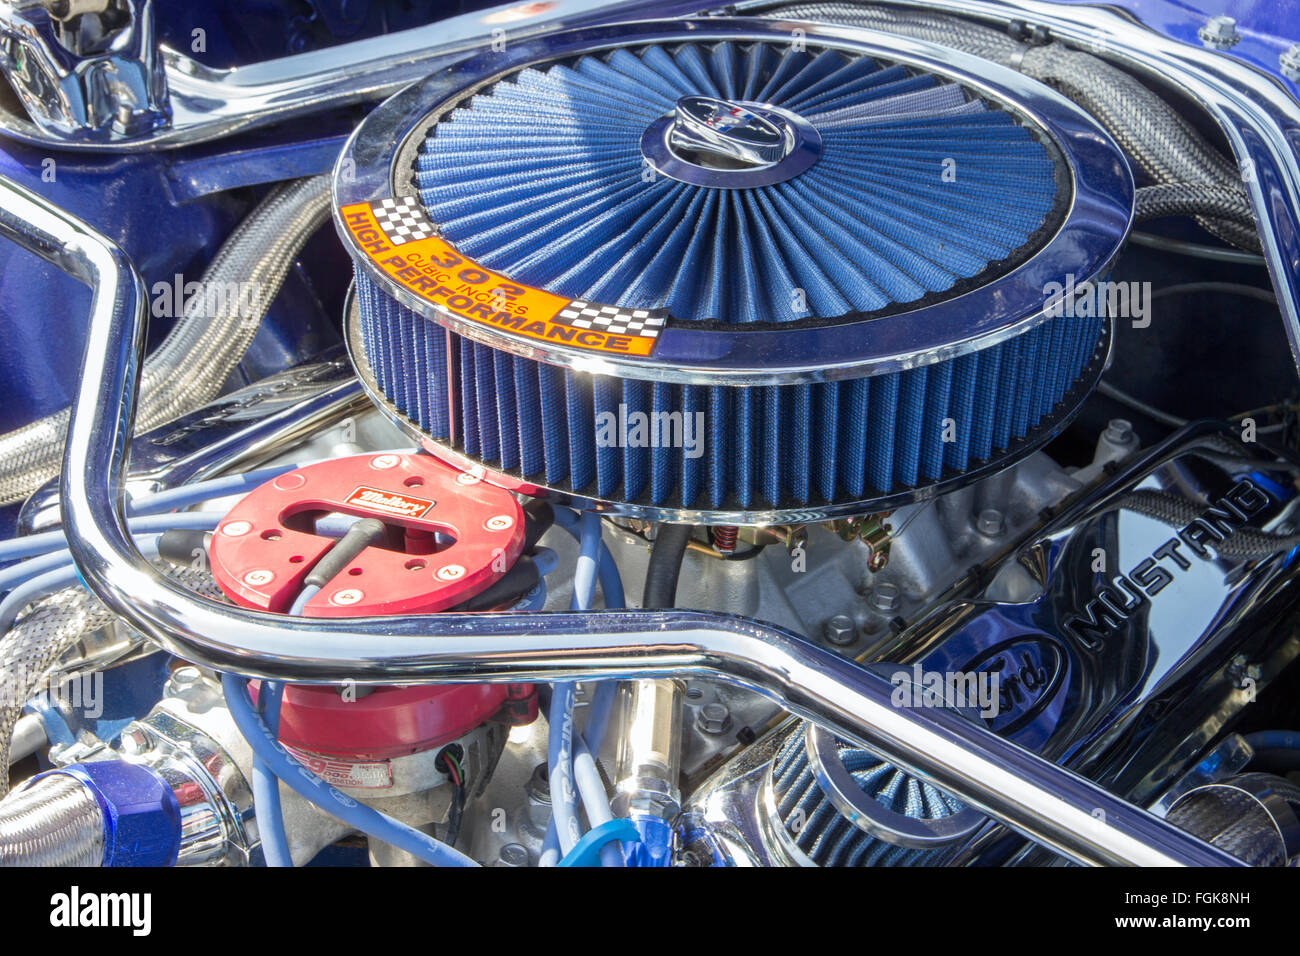 Ford Mustang engine. Stock Photo